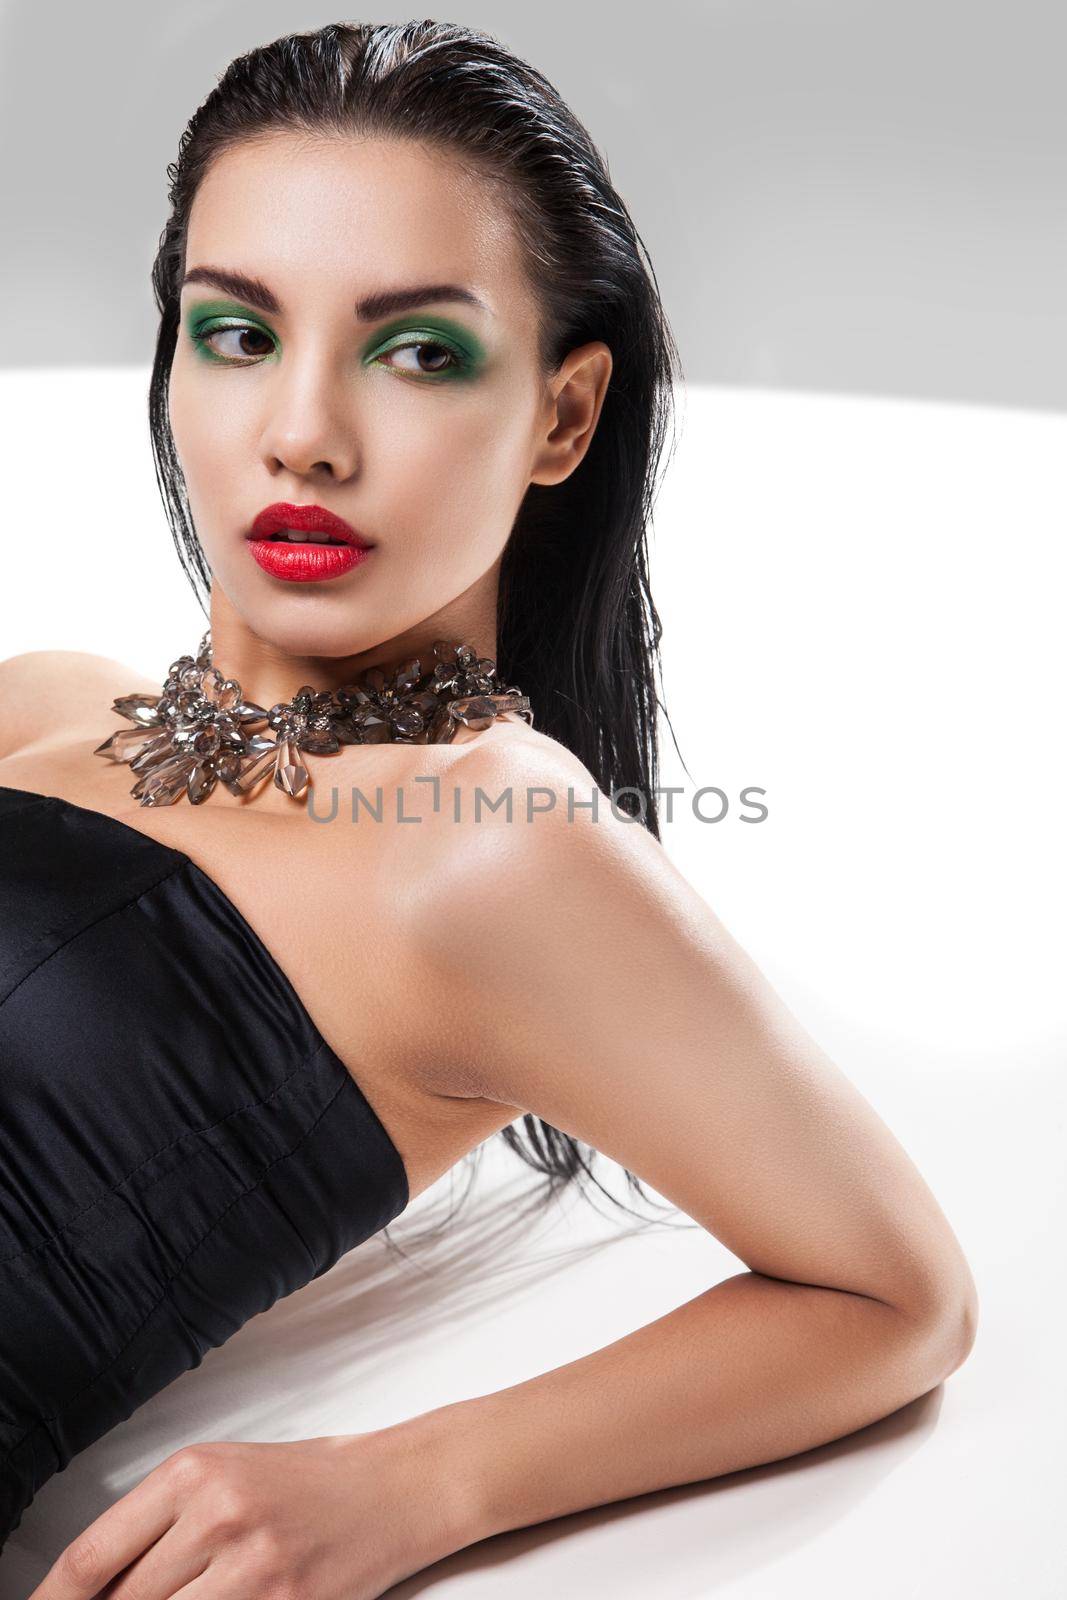 Fashion photo of young magnificent woman posing at studio